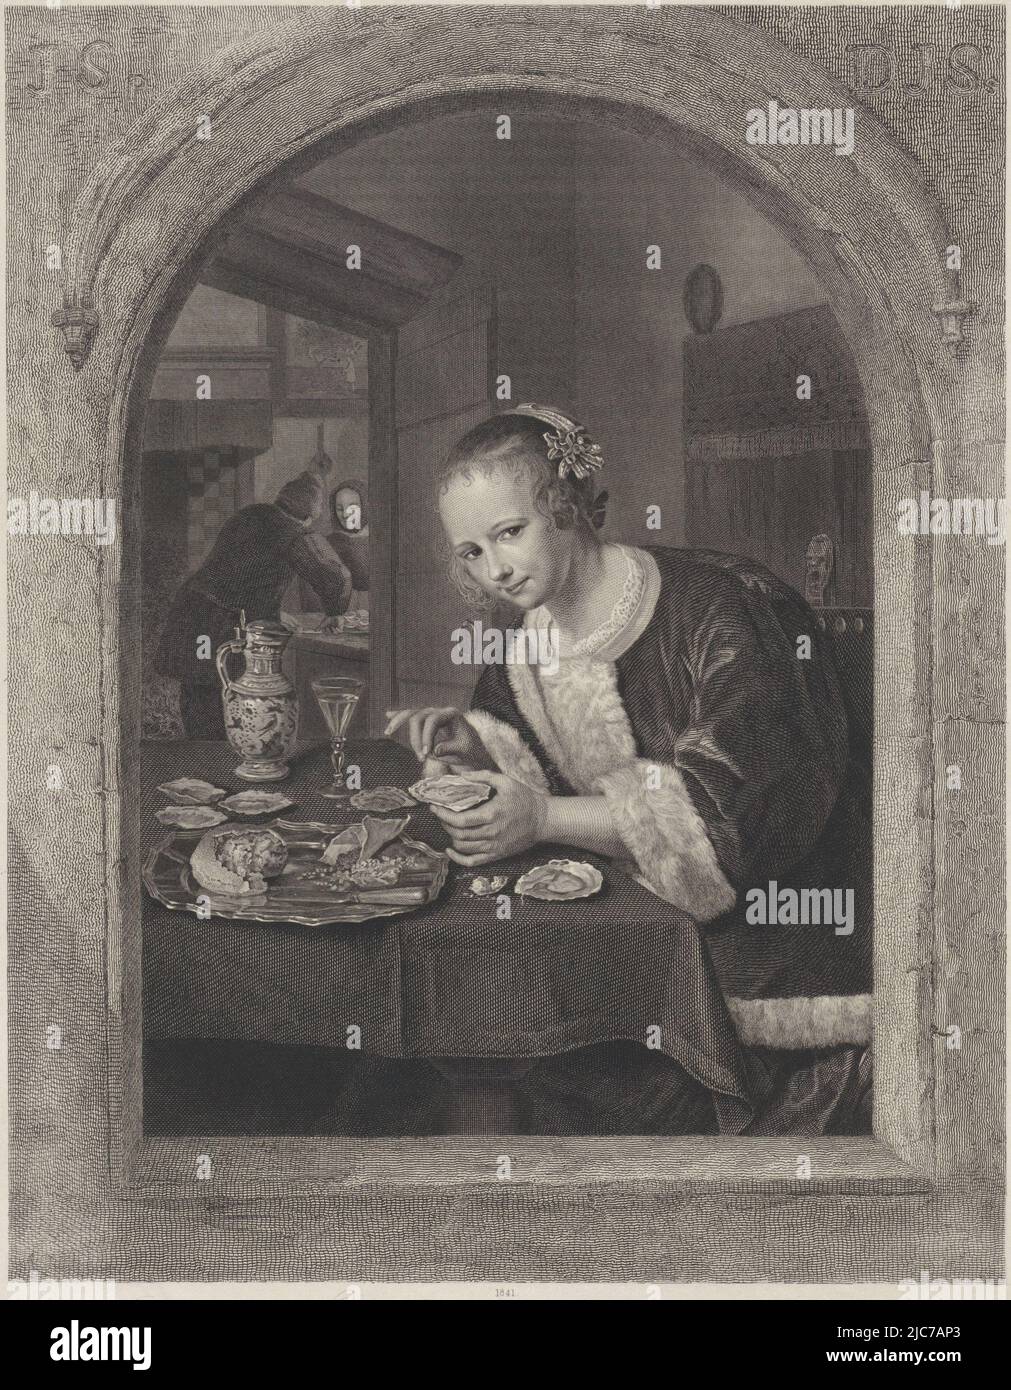 A young woman, dressed in short jacket with fur trim, sits at a table on which are a bowl of oysters, a glass of wine and a pitcher. She holds an oyster in her left hand. Behind her a bed with closed curtains. In the background left, a second room in which a woman is watching a man open oysters. The entire scene is seen through an arched window. The initials of the painter and printmaker are inscribed in the wall above the window. Below the print is a caption relating to the then location of the original painting by Jan Steen: the cabinet of jonkheer Hendrik Six van Hillegom, The Oyster Eater Stock Photo